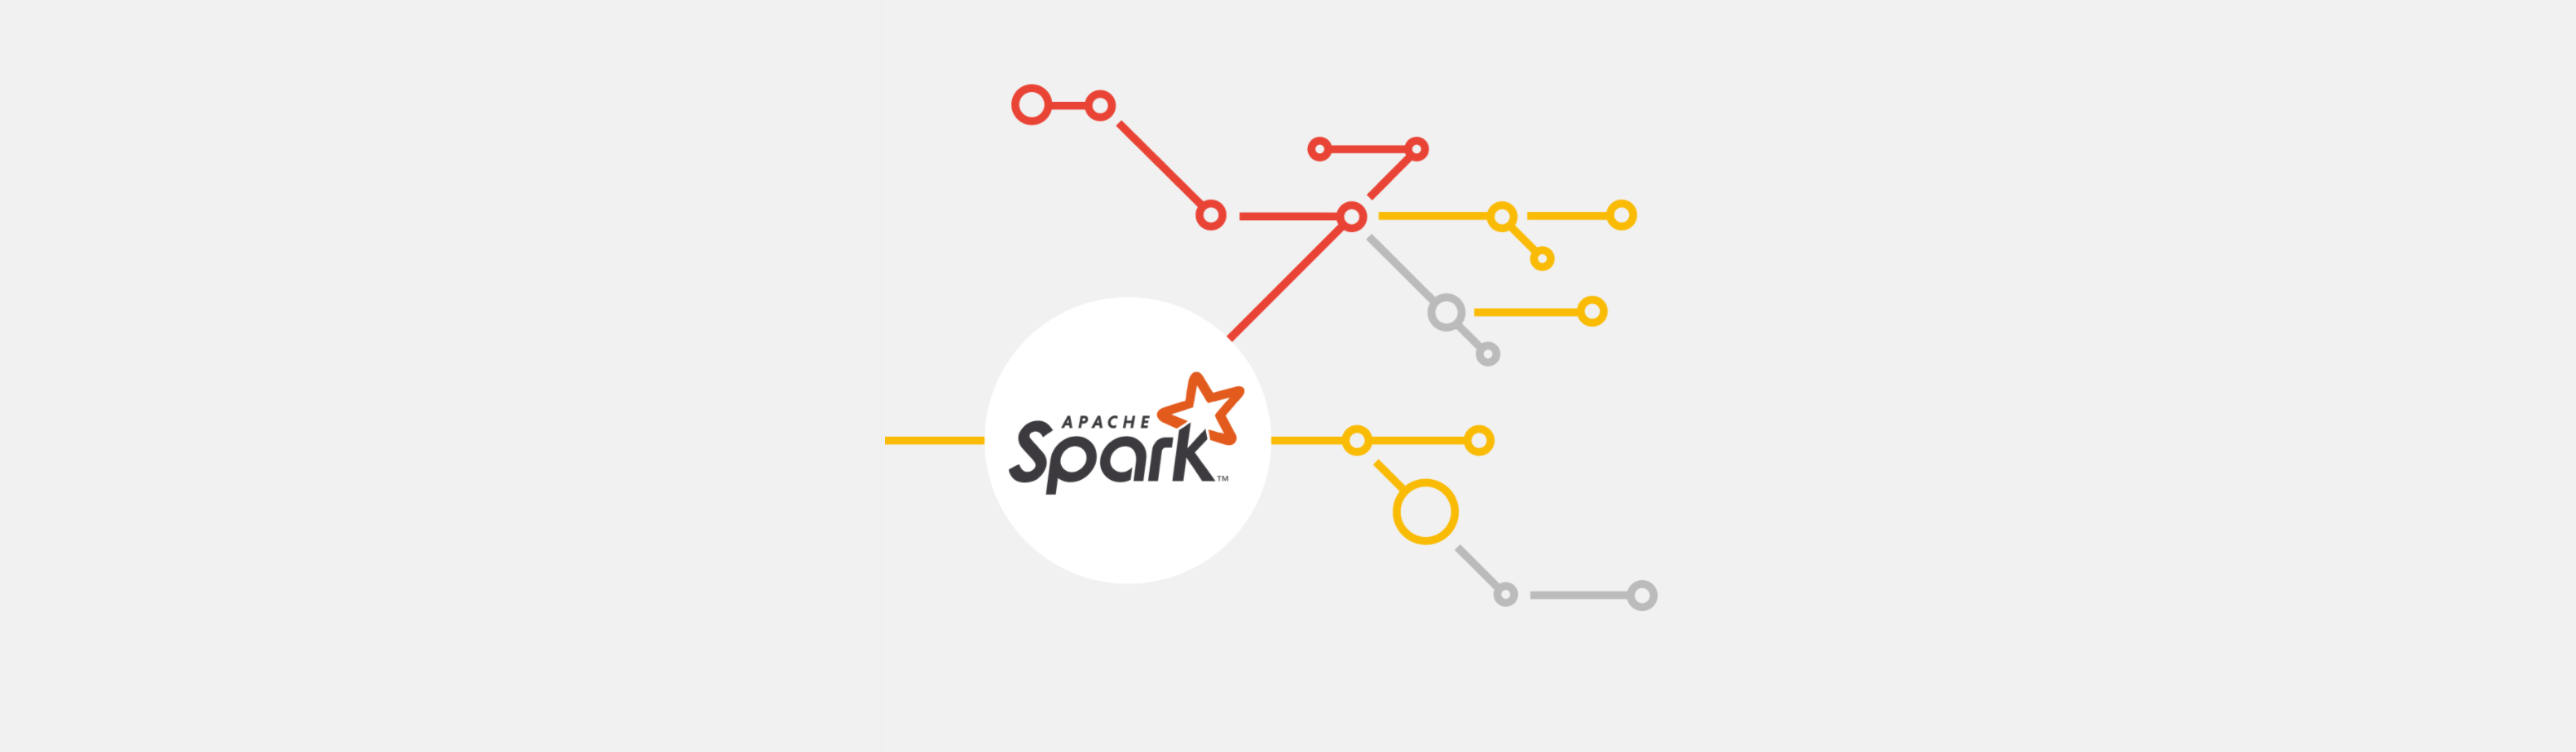 apache-spark-event.png